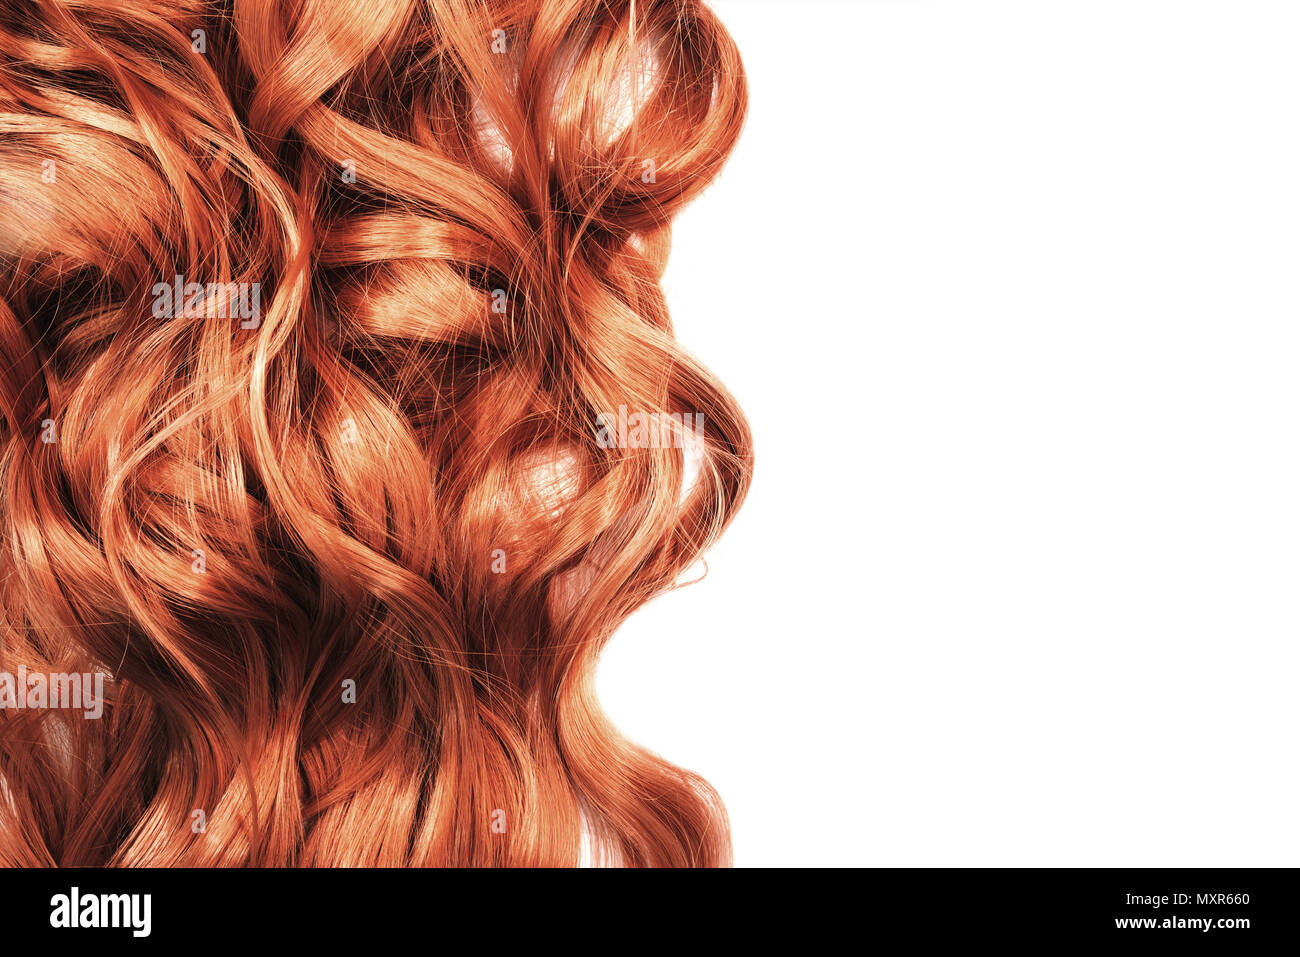 long red wavy hair on white background Stock Photo